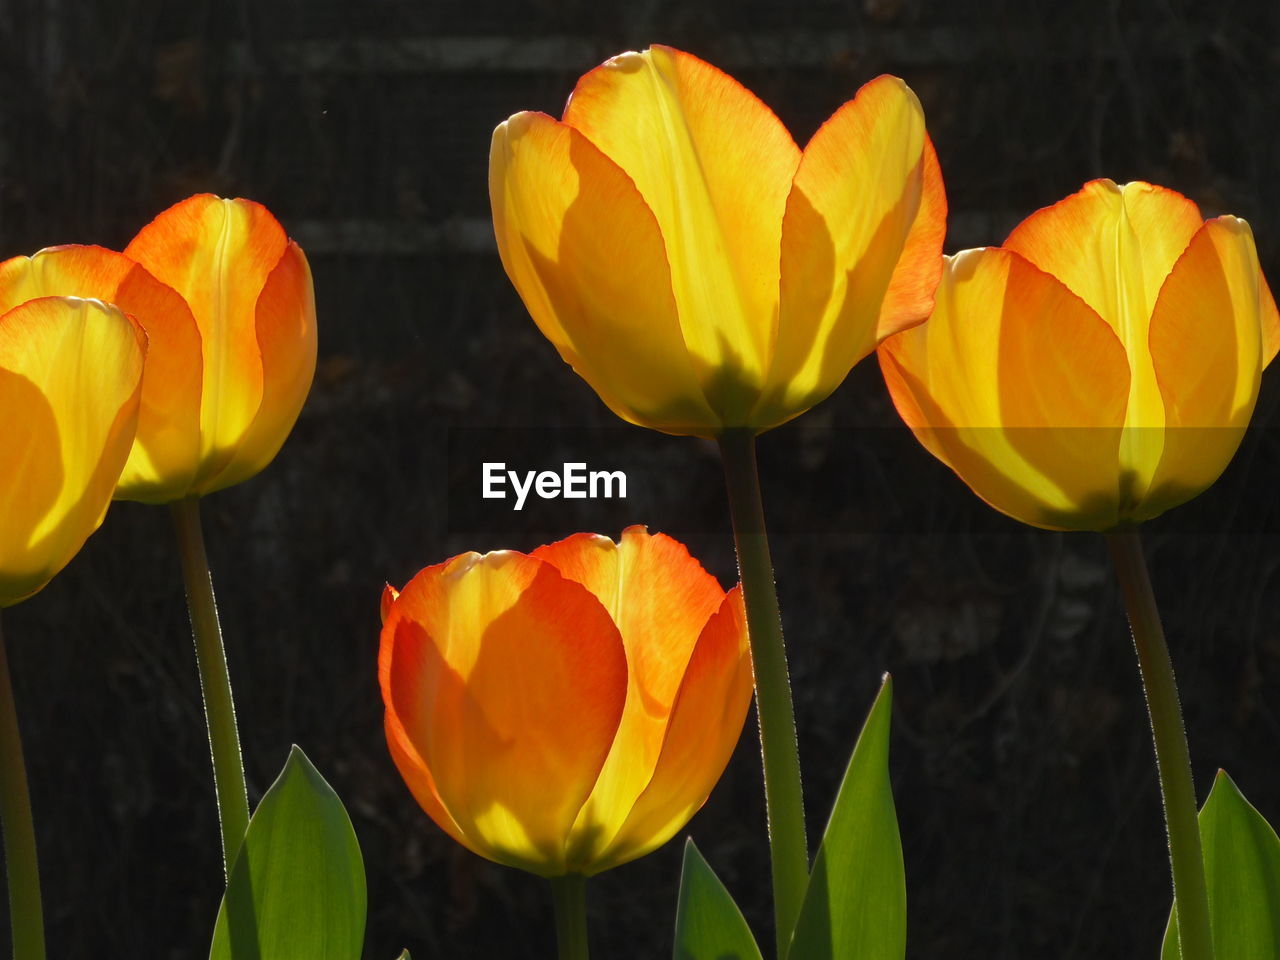 CLOSE-UP OF YELLOW TULIPS